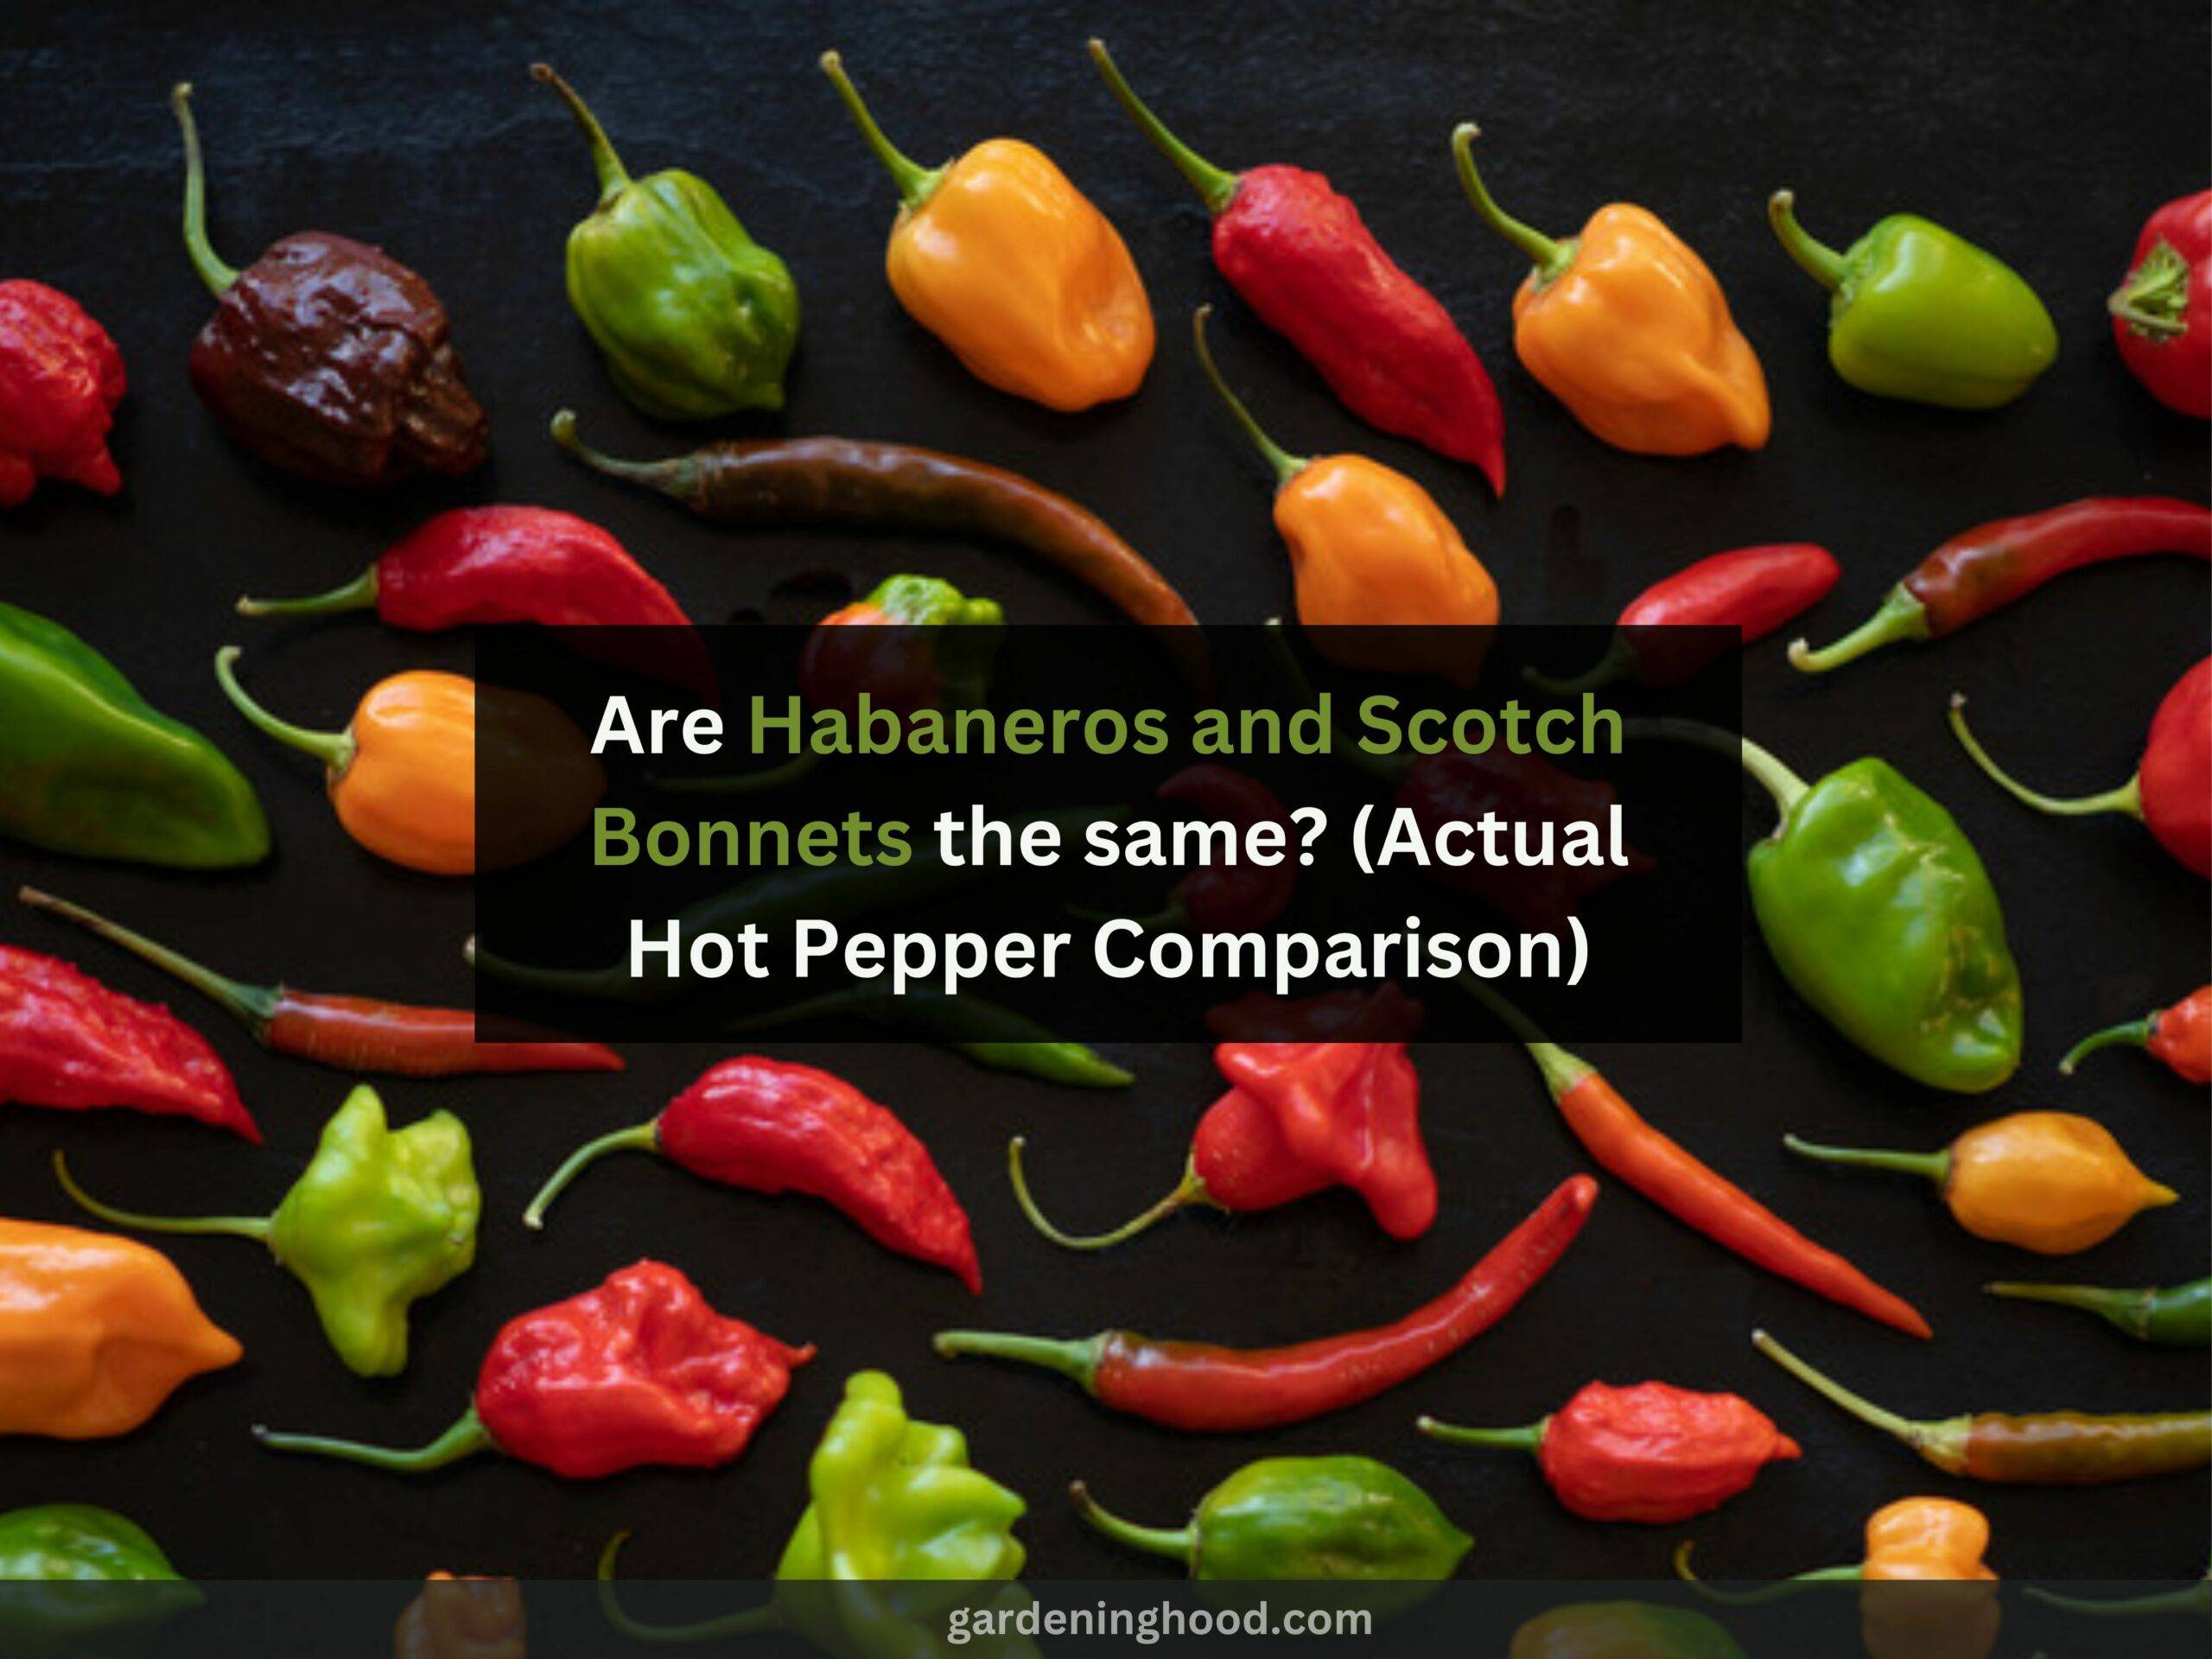 Are Habaneros and Scotch Bonnets the same? (Actual Hot Pepper Comparison)